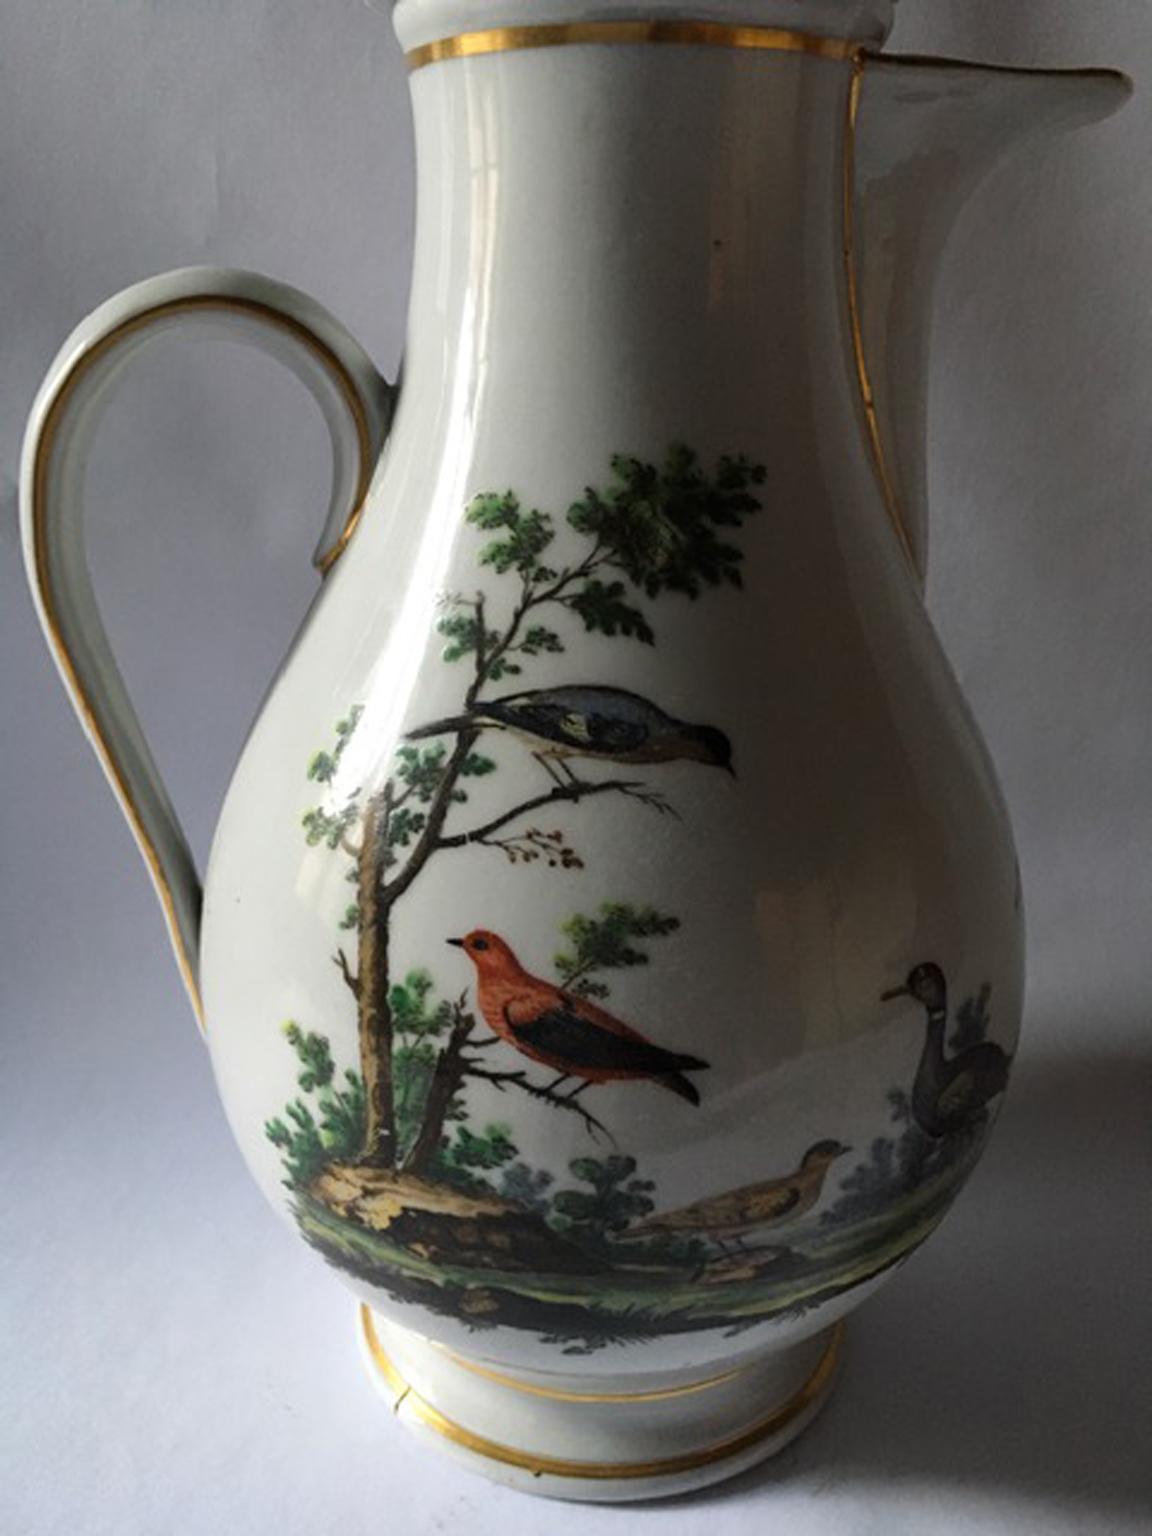 Italy Richard Ginori Mid-18th Century Porcelain Coffee Pot In Good Condition For Sale In Brescia, IT